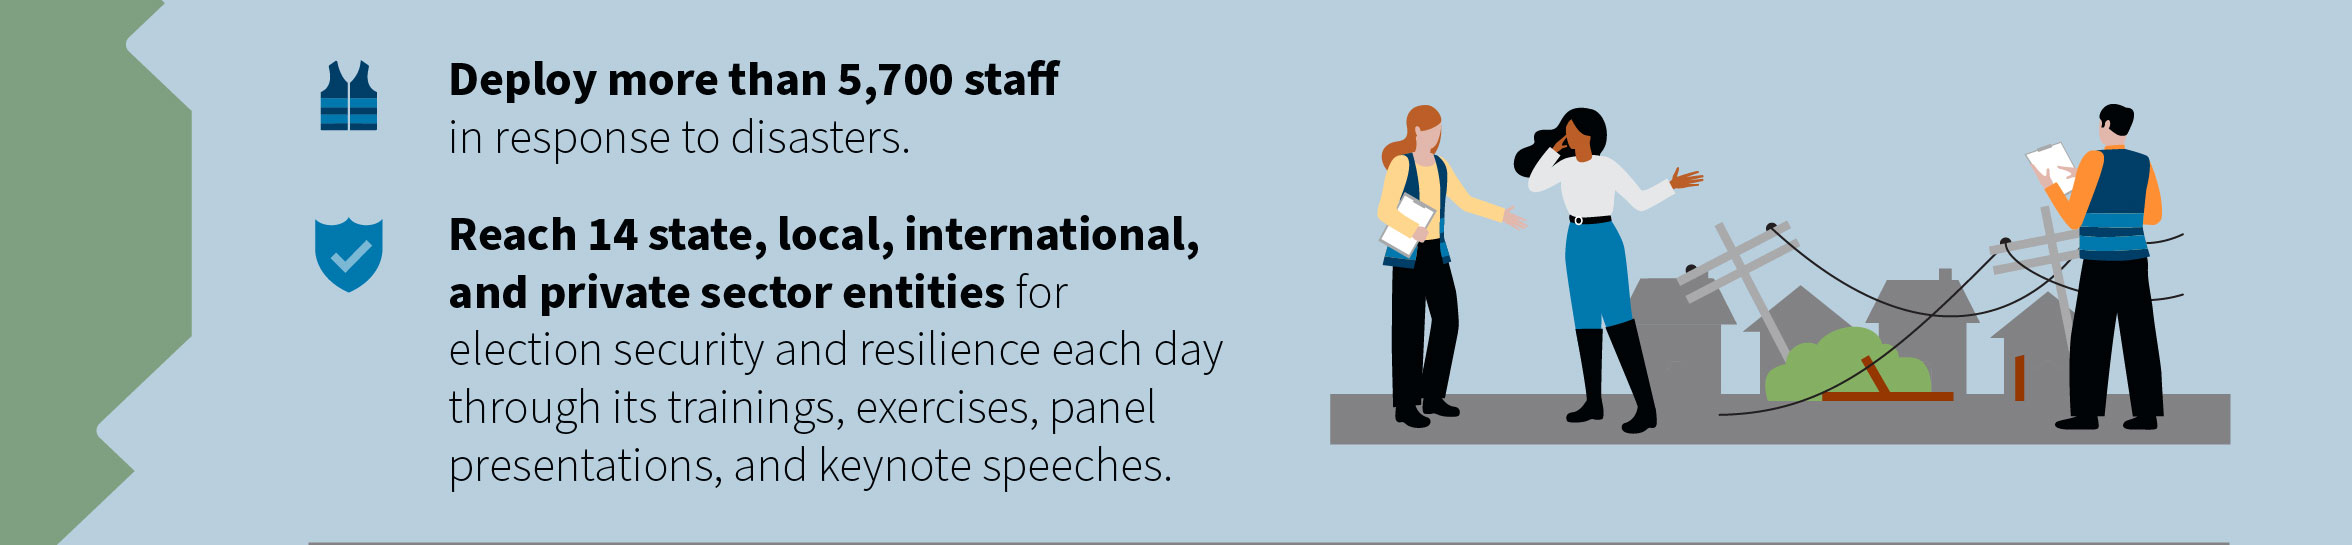 Deploy more than 5,700 staff in response to disasters. Reach 14 state, local, international, and private sector entities for election security and resilience each day through its trainings, exercises, panel presentations, and keynote speeches.